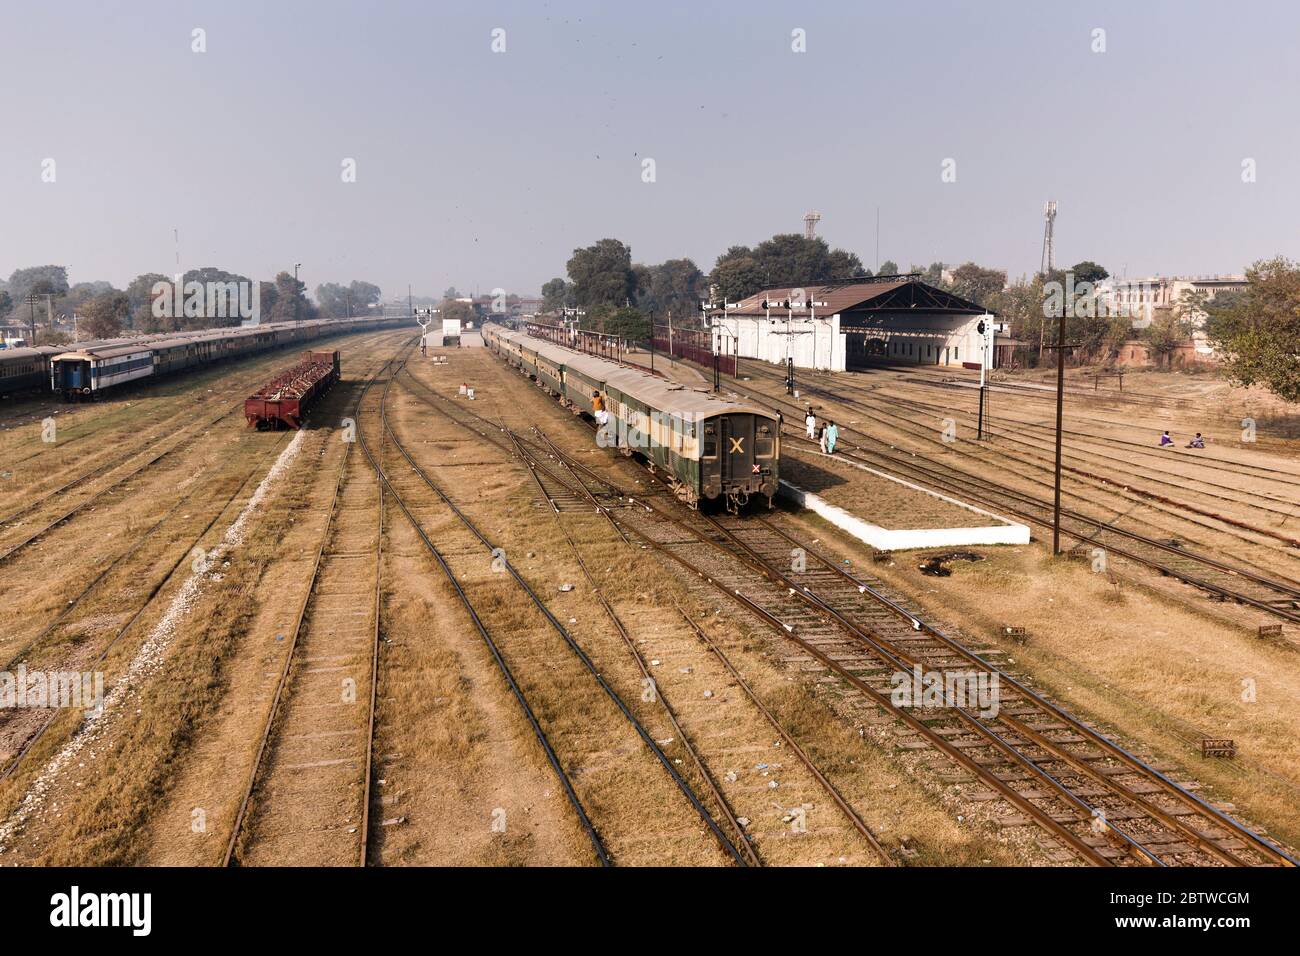 Railway station of Wazirabad town, estimated one of  ancient Alexandria city, Gujranwala District, Punjab Province, Pakistan, South Asia, Asia Stock Photo